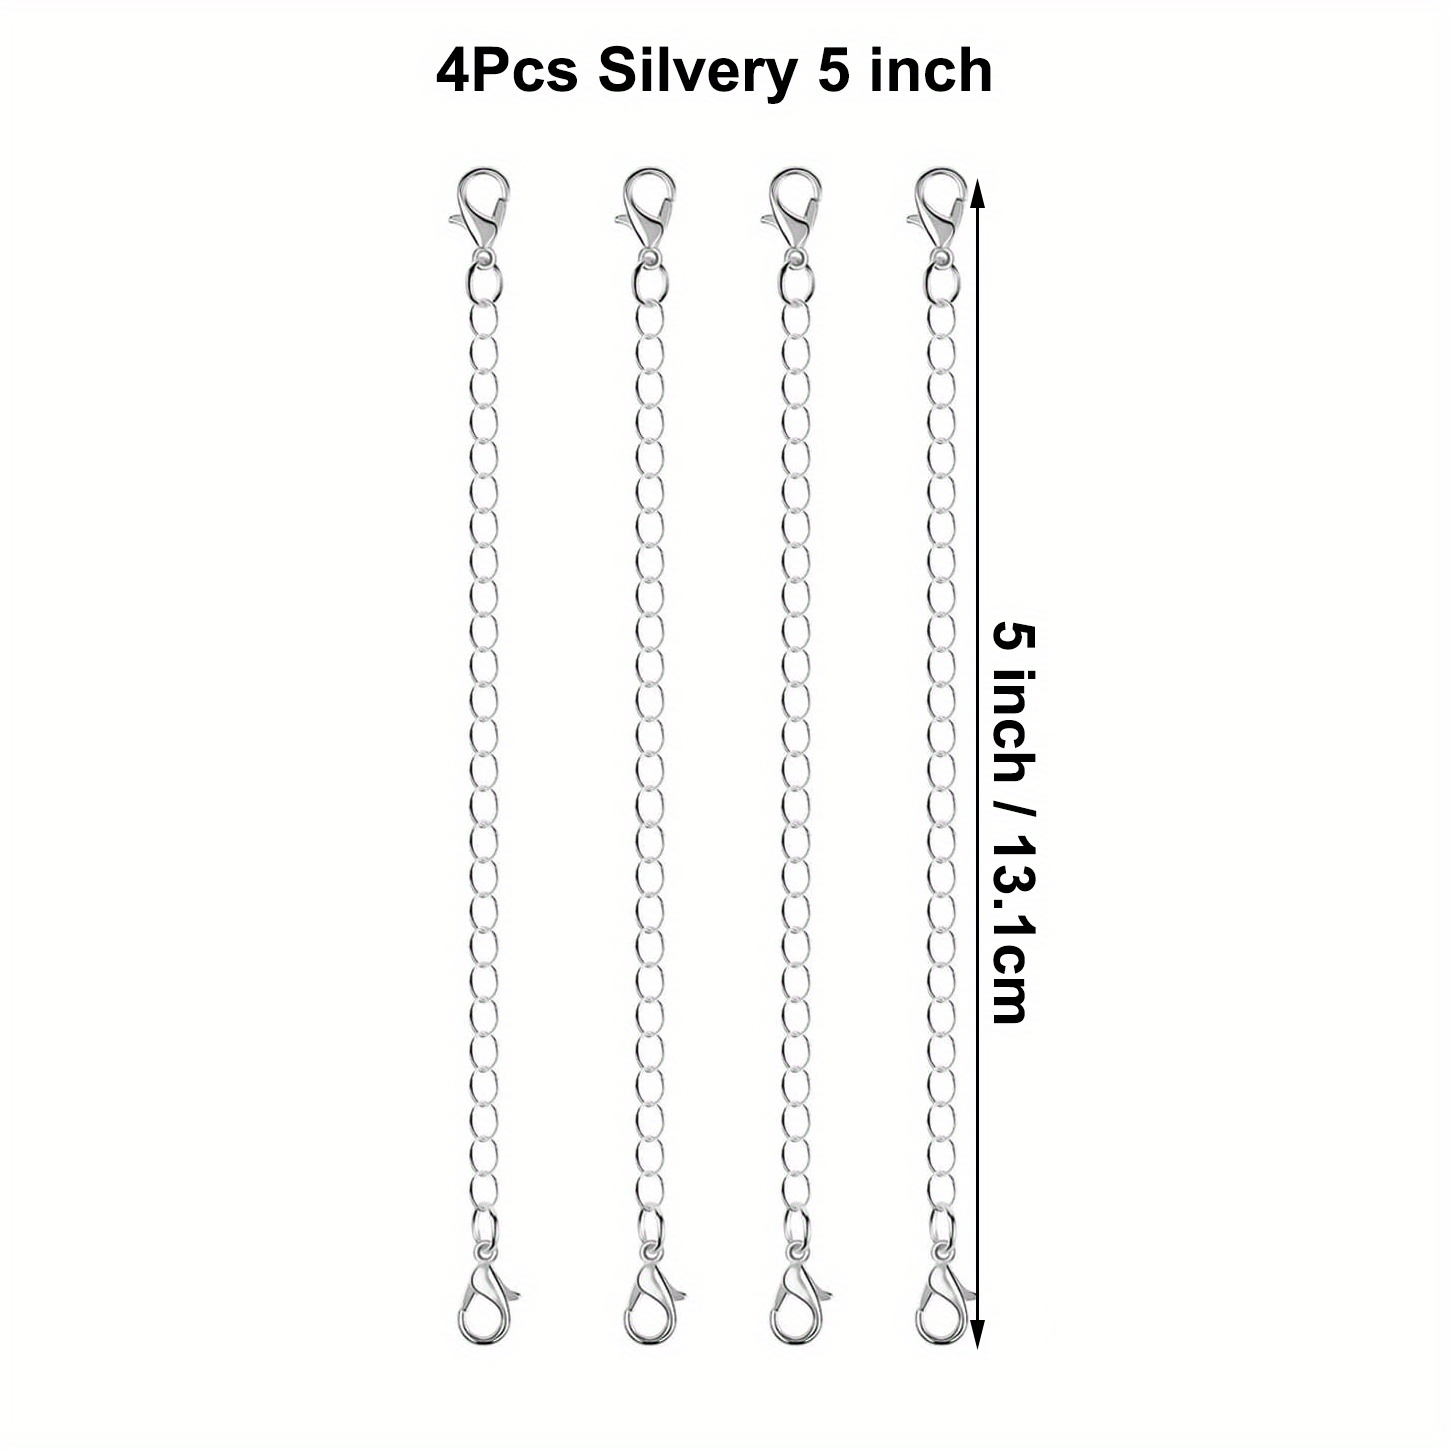  Necklace Extender White Gold Chain Extender 925 Sterling Silver  Necklace Bracelet Anklet Extenders Chain Extension for Jewelry Making (1 2  3 inch) : Arts, Crafts & Sewing